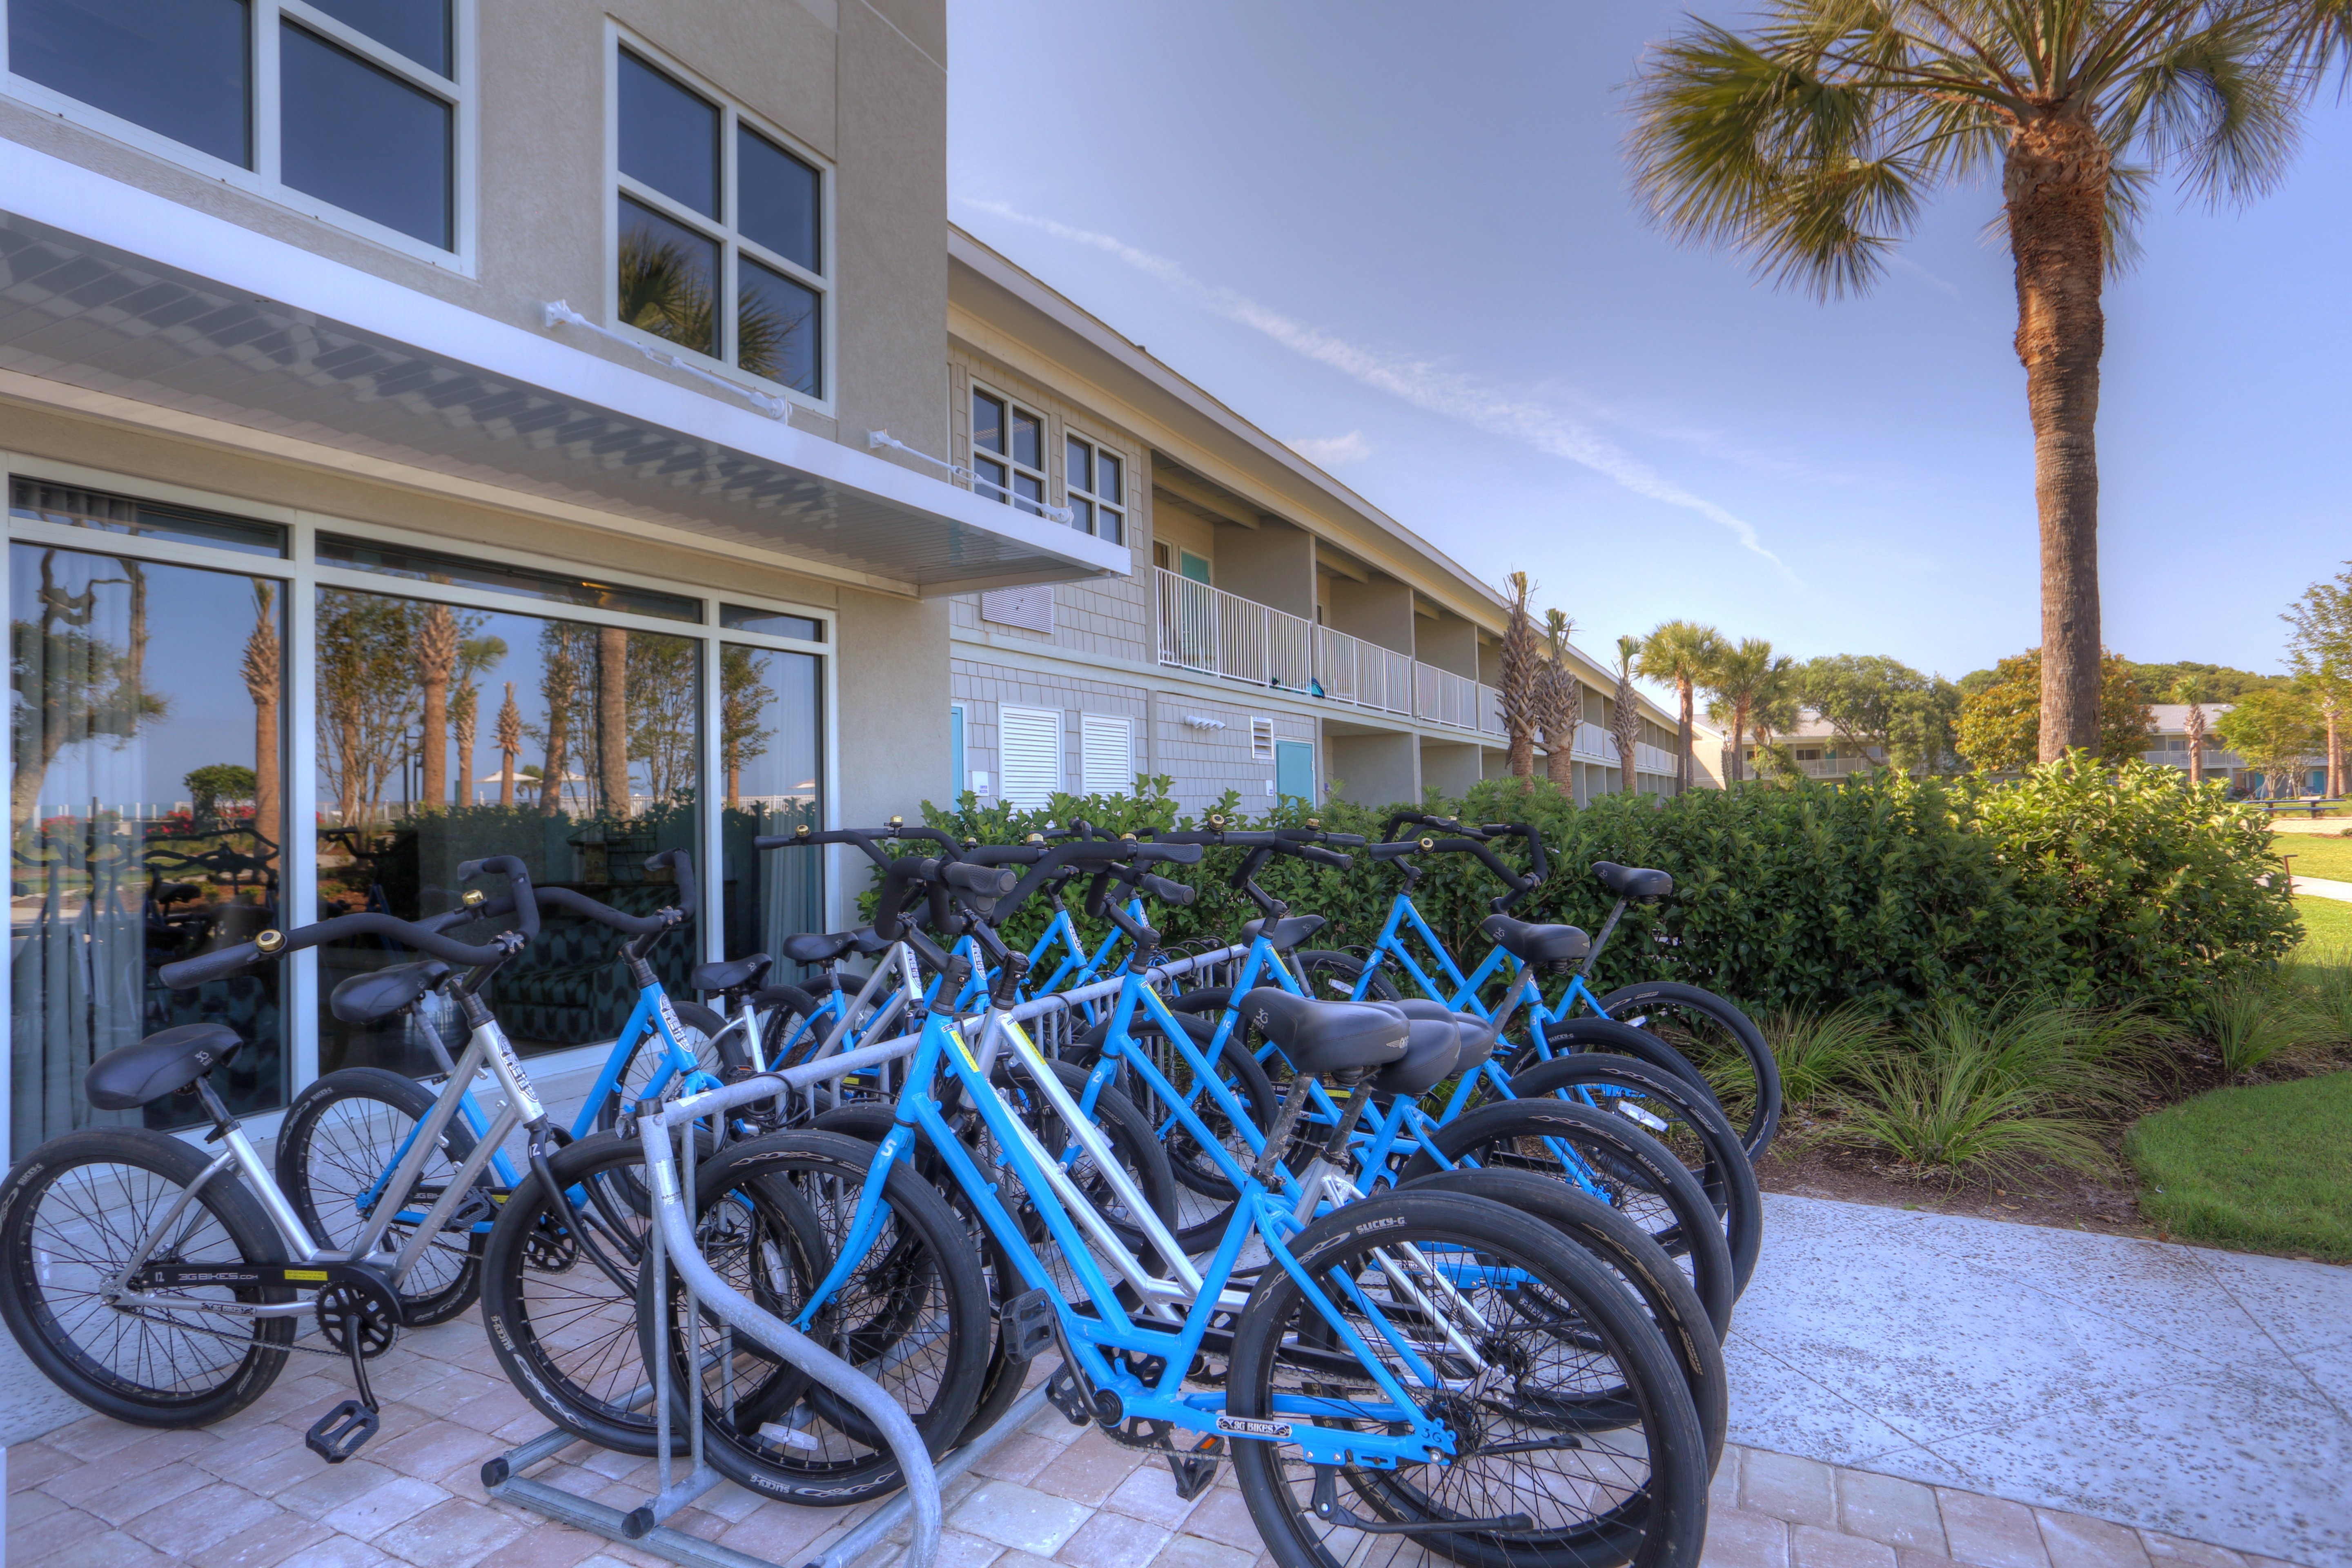 Onsite bike rentals to enjoy over 20 miles of paths on the island 